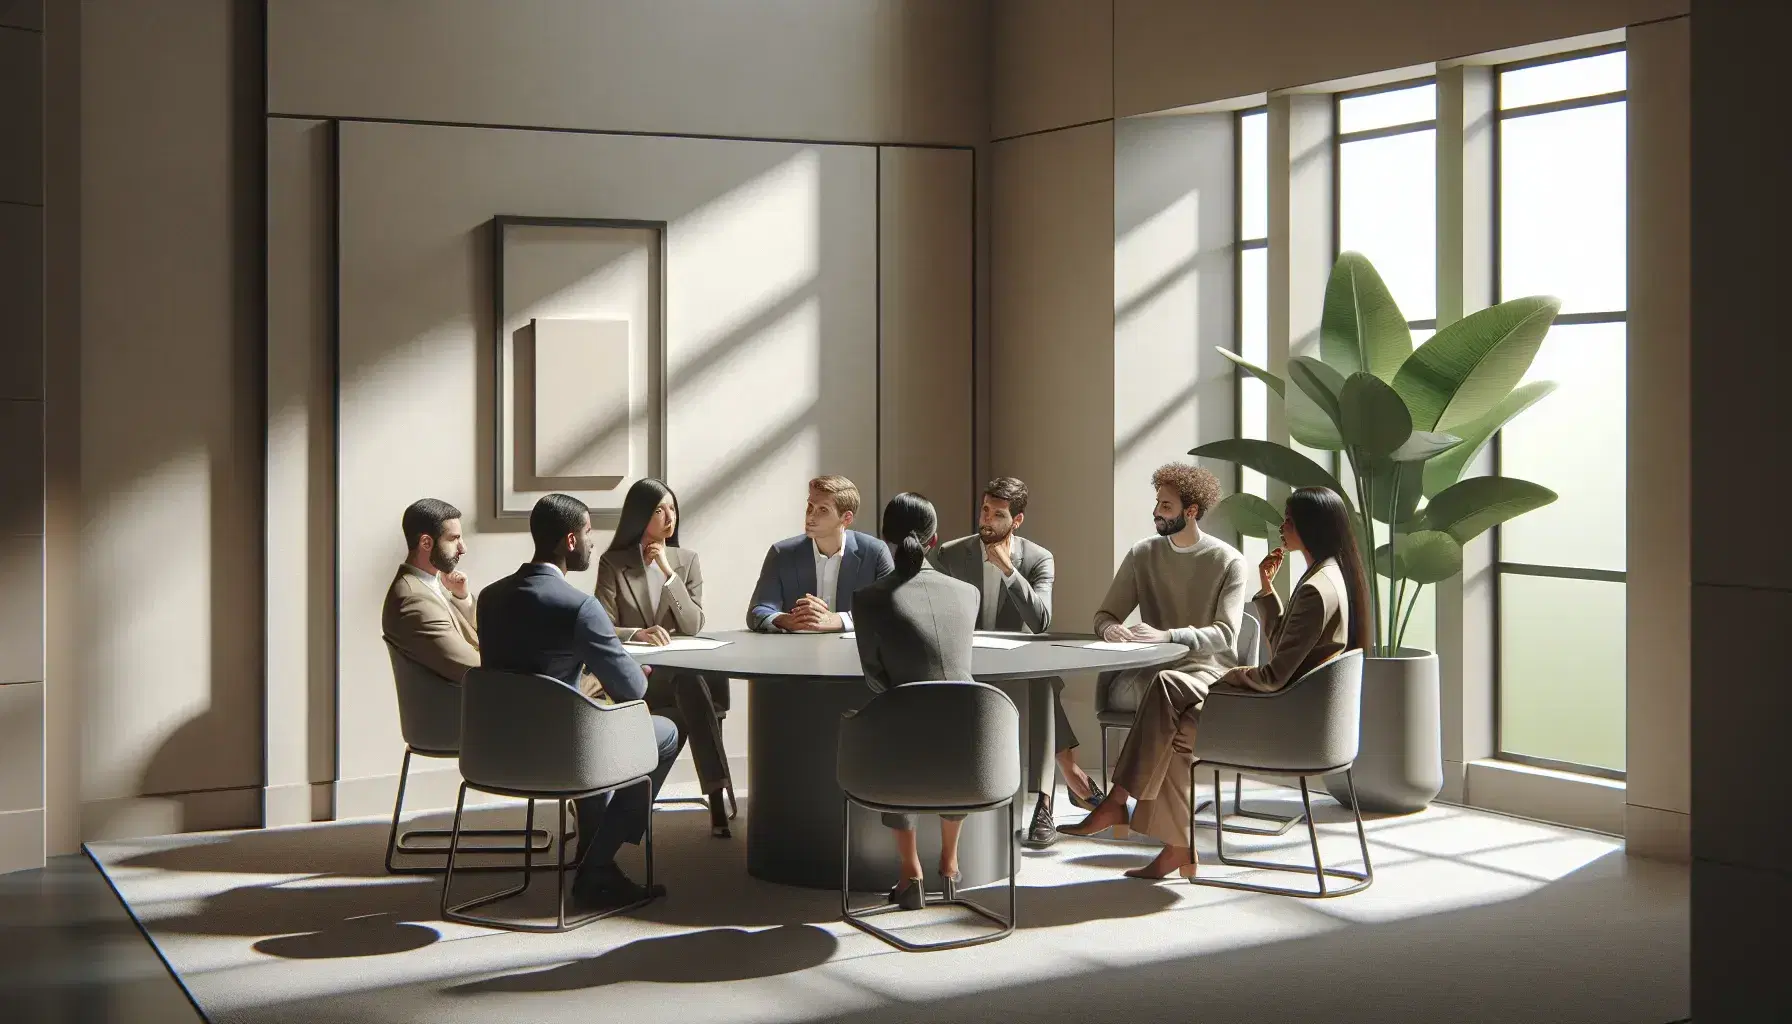 Multicultural group of six people meeting around a round table in a naturally lit conference room with green plant.